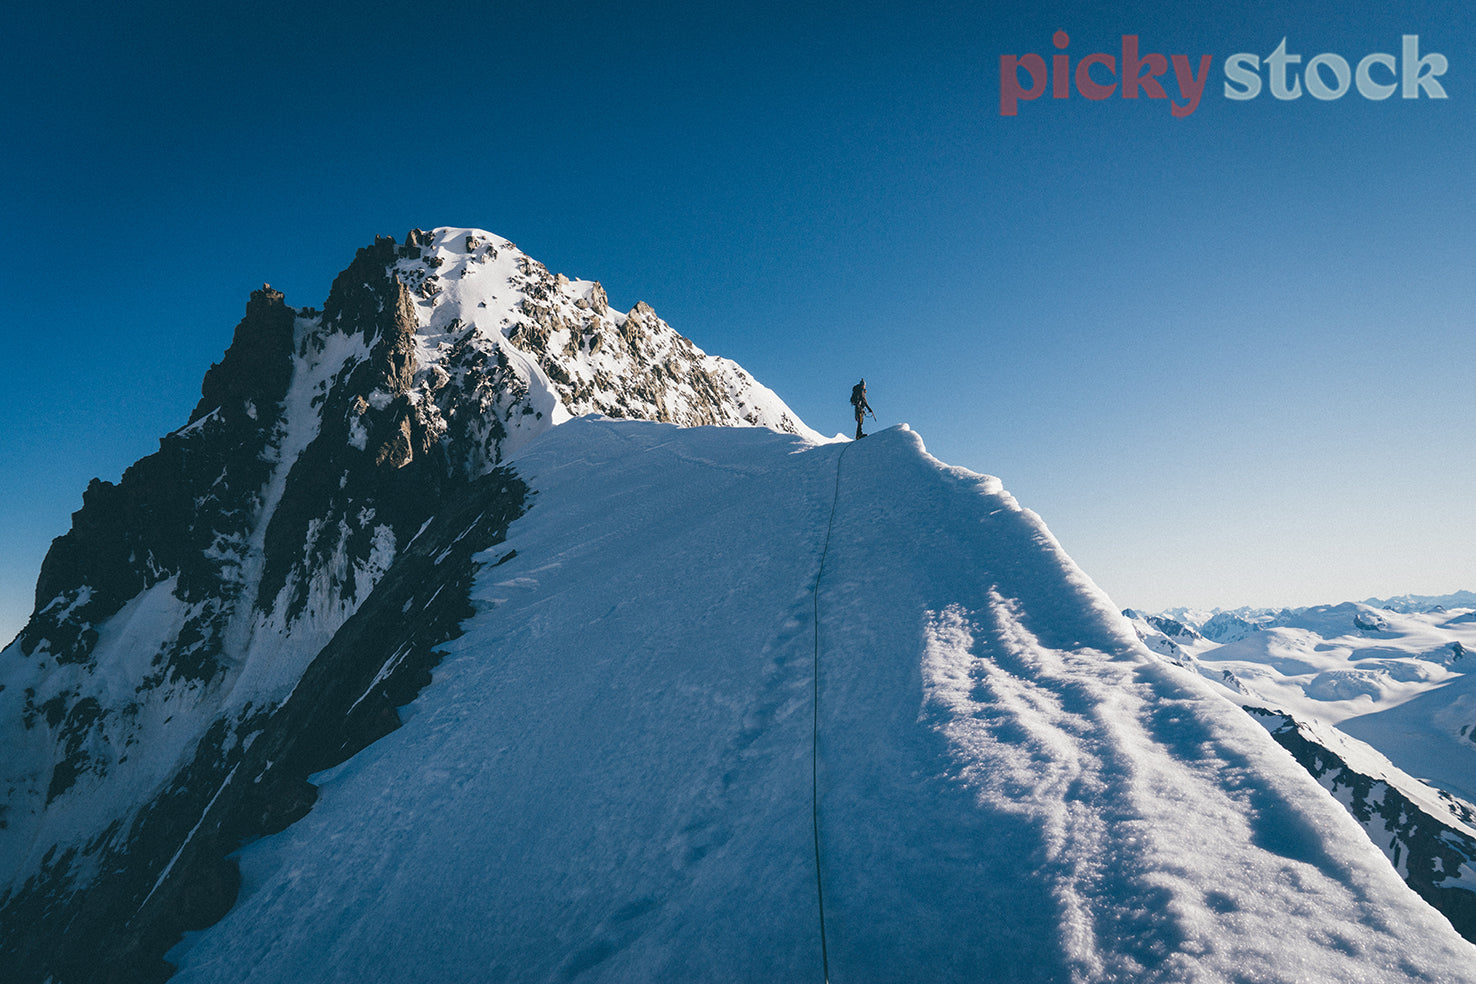 Mountain climber along an icy ridge overlooking the valley filled with clouds